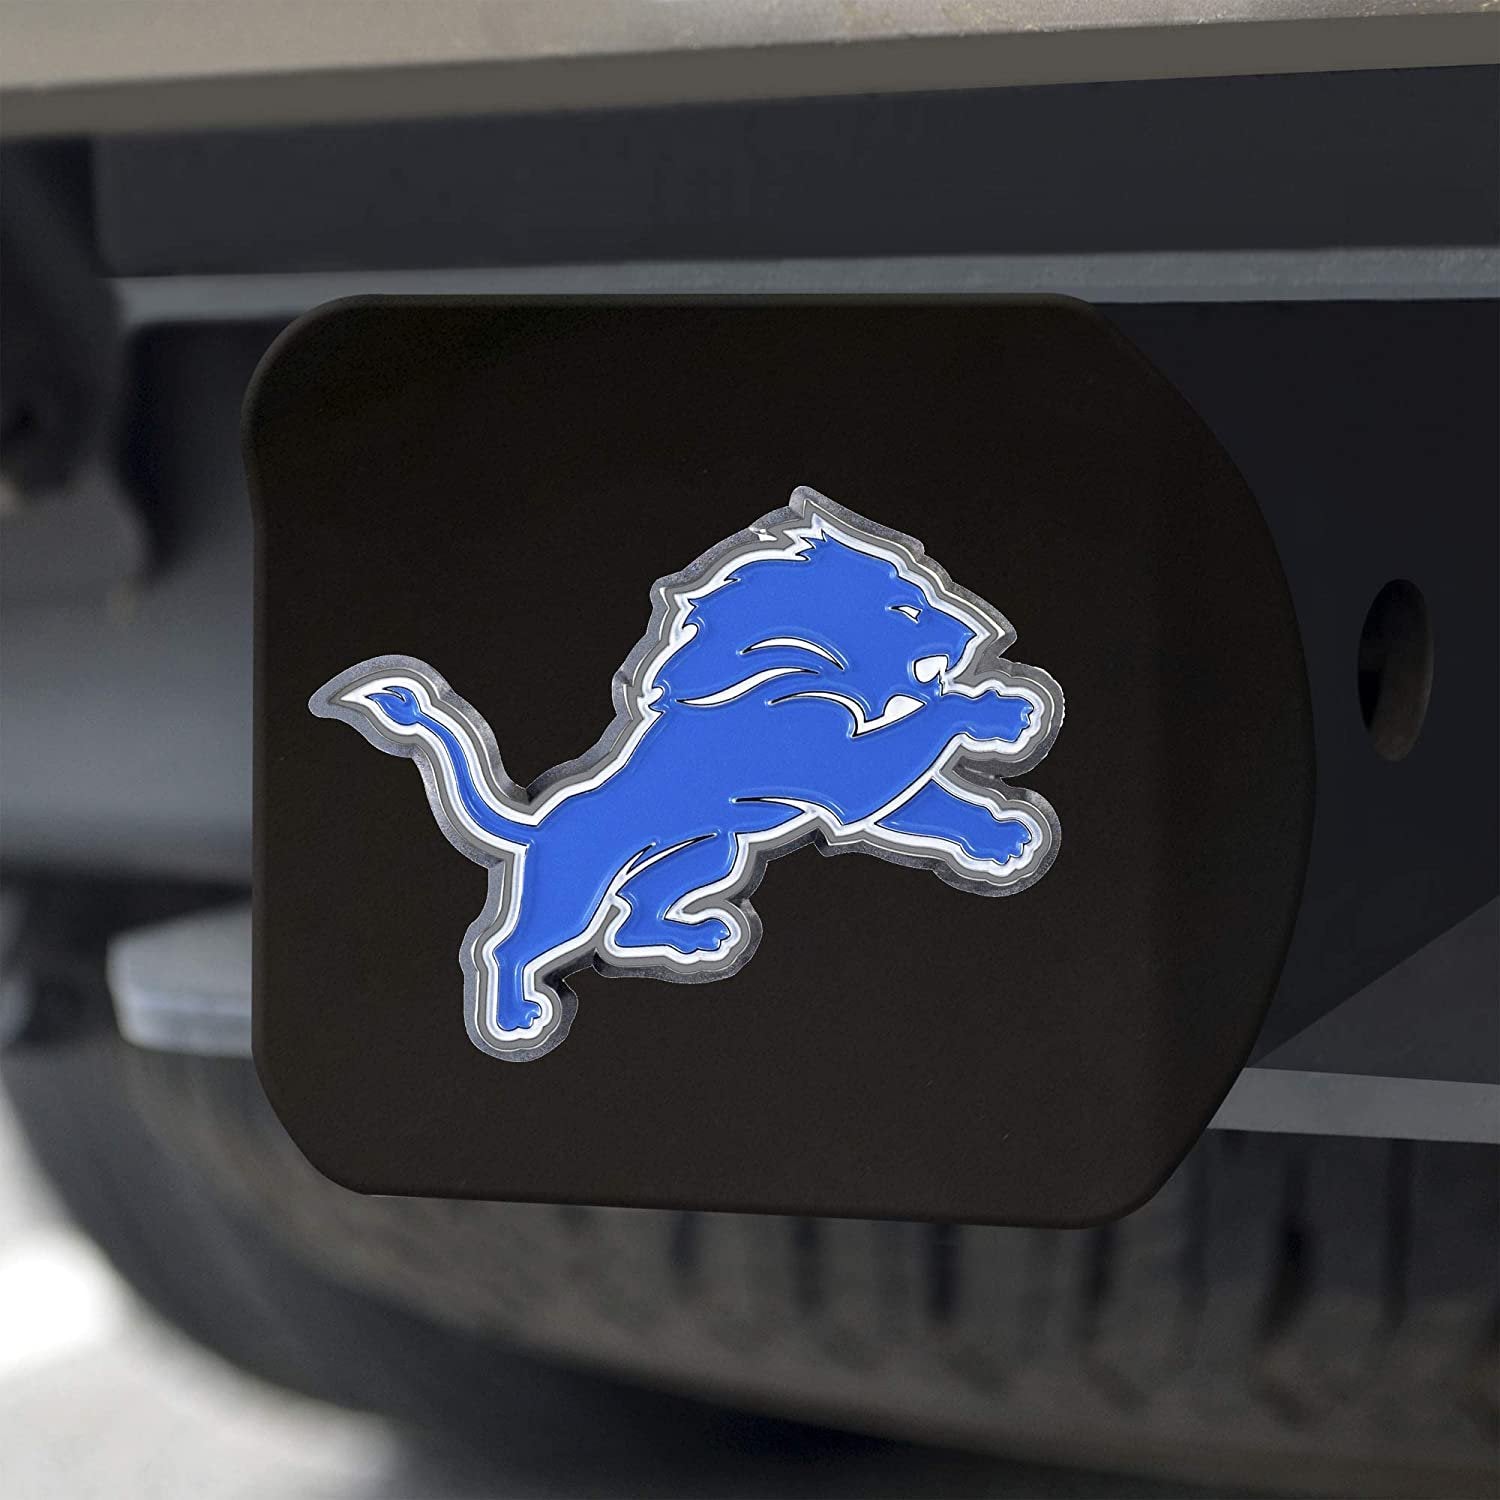 Detroit Lions Hitch Cover Black Solid Metal with Raised Color Metal Emblem 2" Square Type III